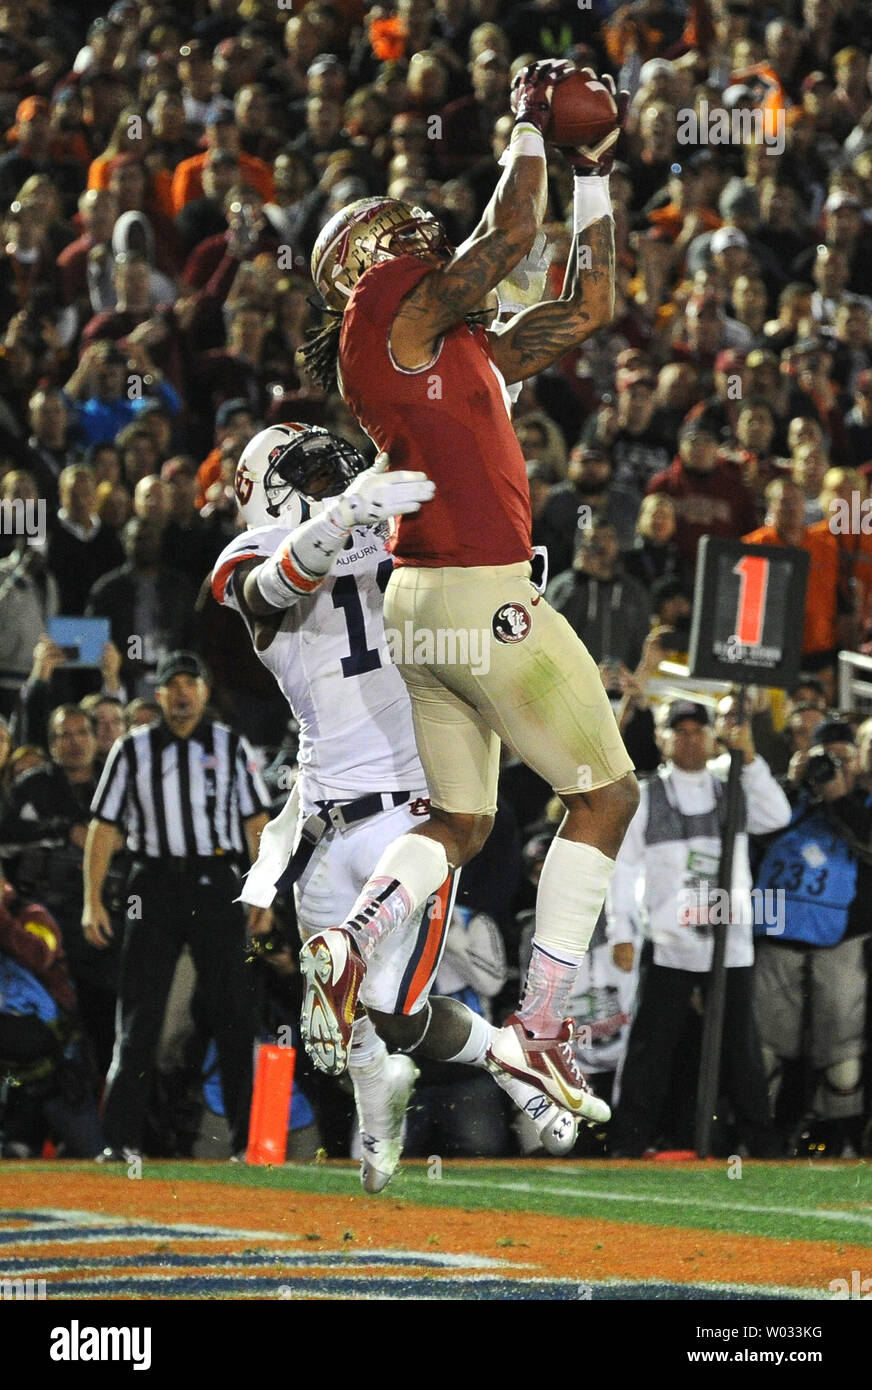 Florida State Seminoles receiver Kelvin Benjamin makes the game-winning touchdown catch over Auburn Tiger cornerback Chris Davis with 13 seconds left in the BCS national title college game at the Rose Bowl in Pasadena, California on January 6, 2014.   Heisman Trophy winner quarterback Jameis Winston threw the two-yard pass.   Florida State defeated Auburn by a score of 34-31.   UPI/Jon SooHoo Stock Photo